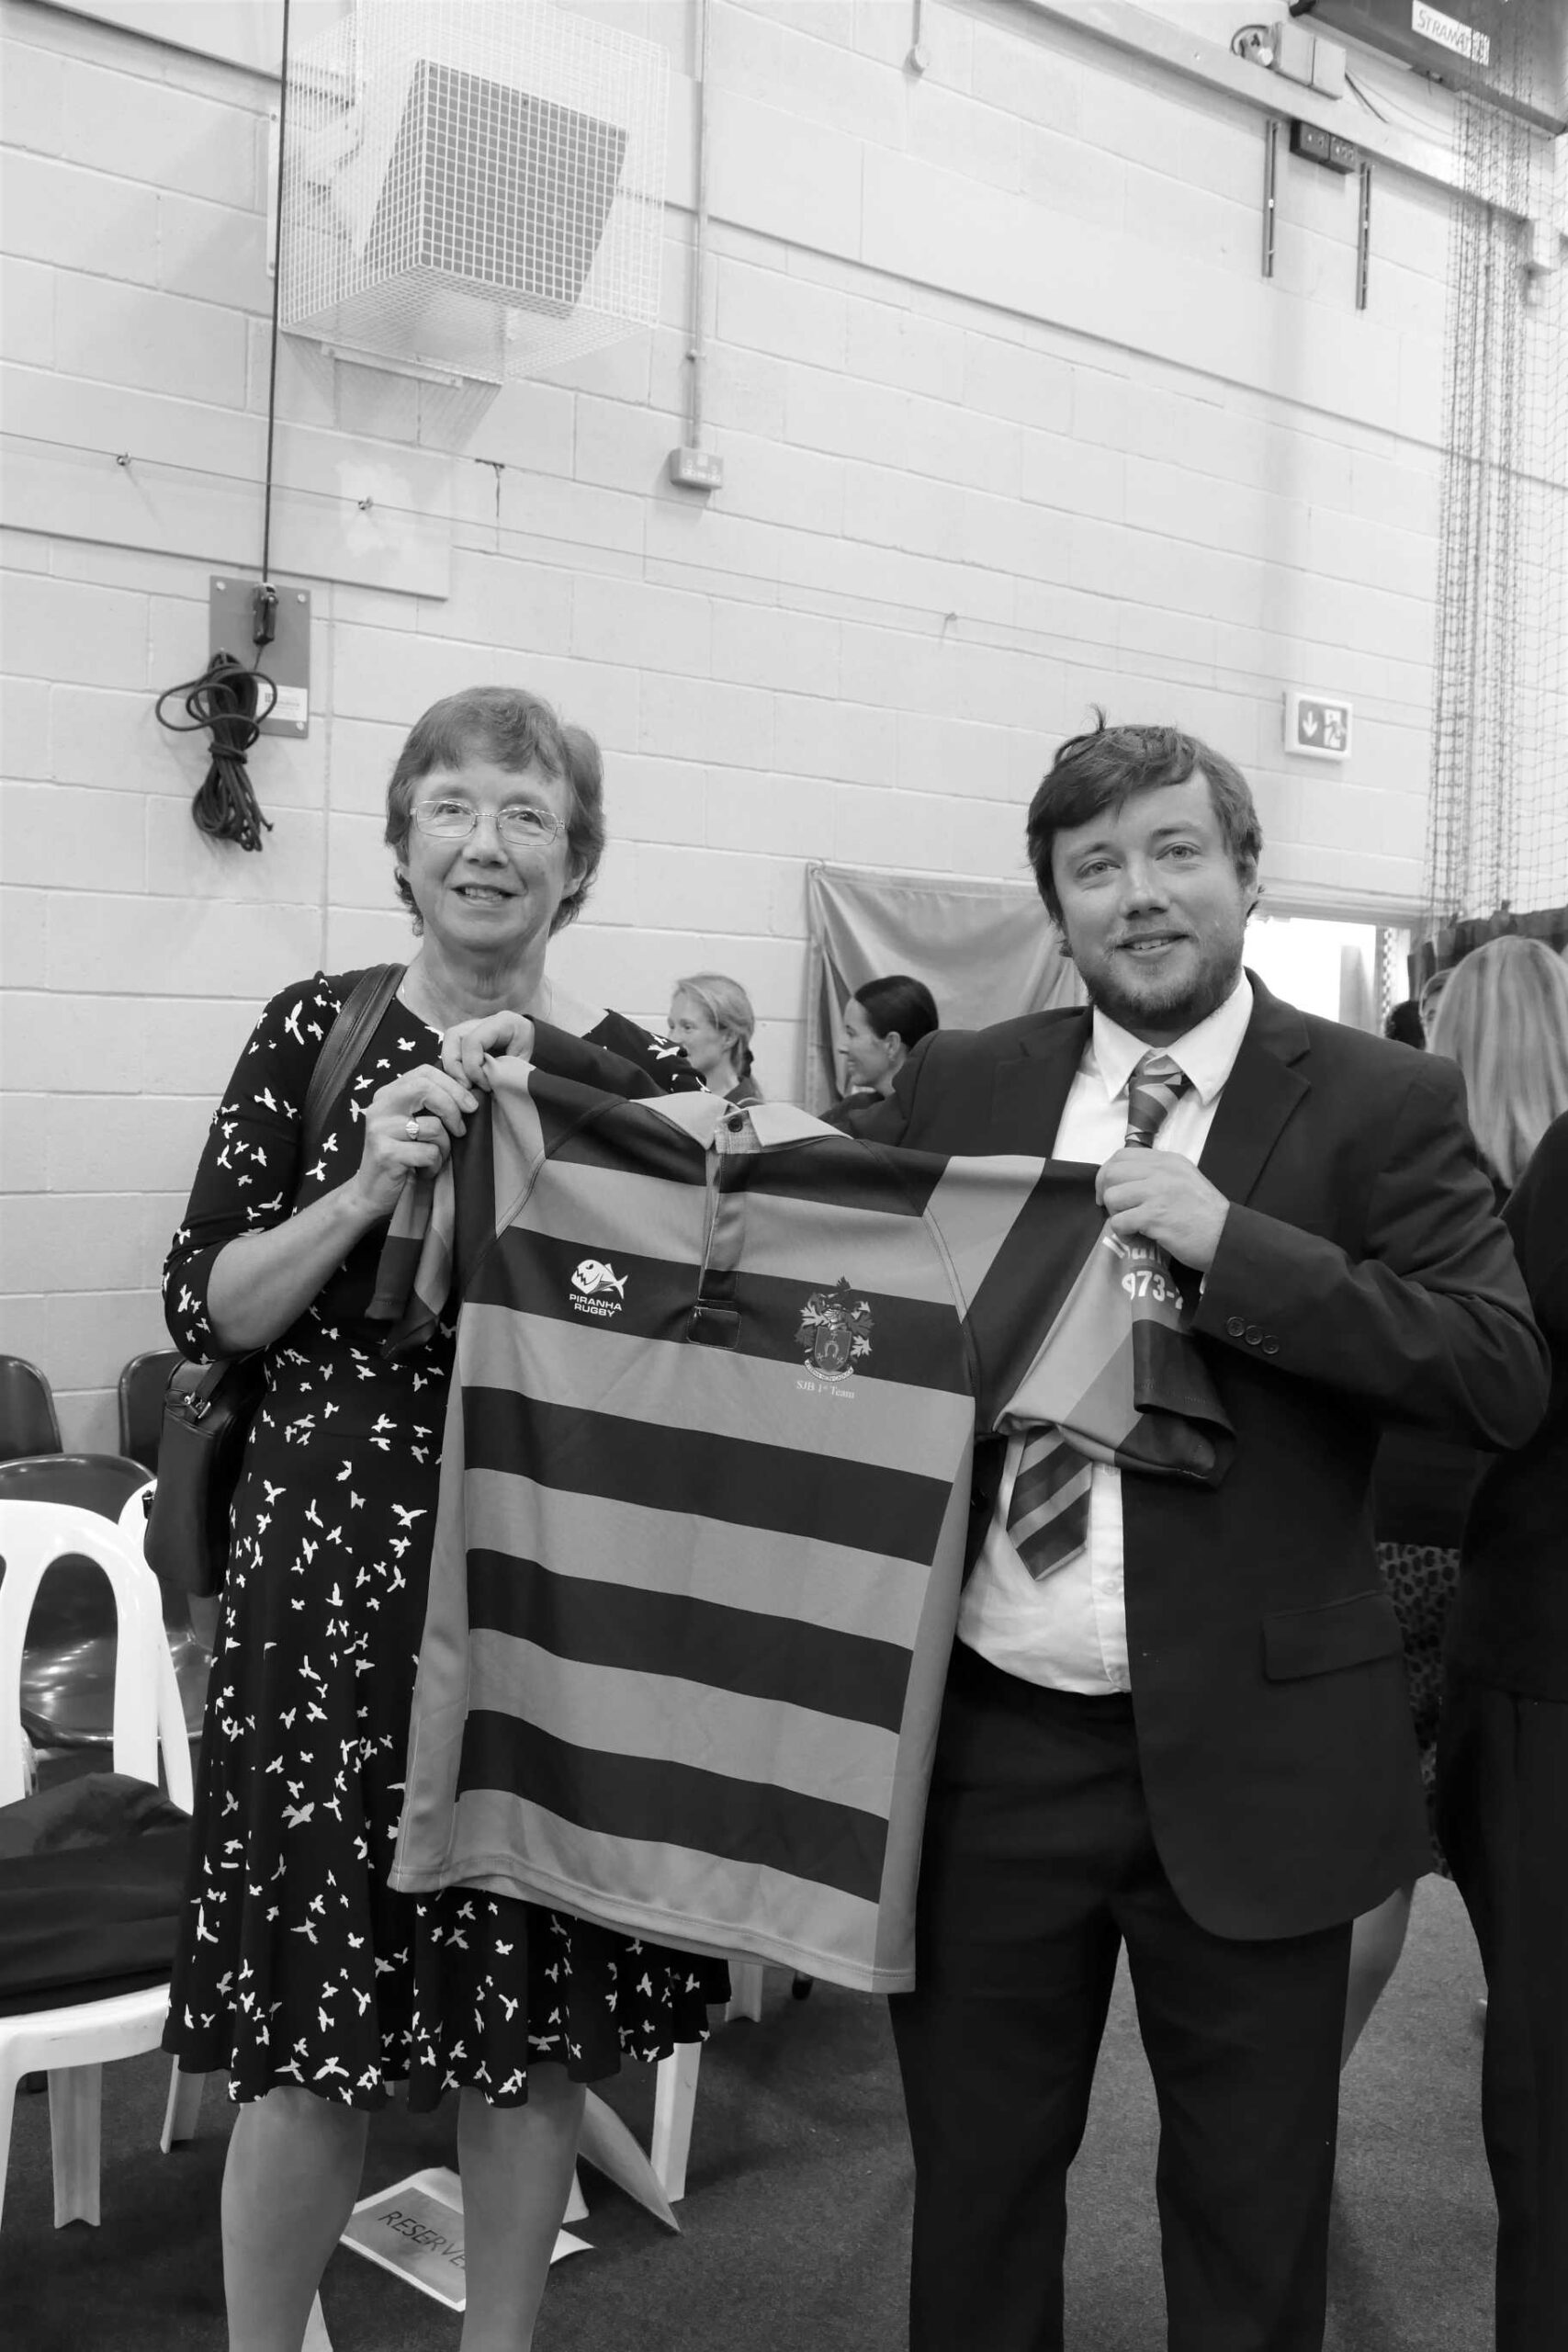 Colin Ballantyne's widow Angela and son Duncan were being presented with a special First Team Rugby Jersey in memory of Colin